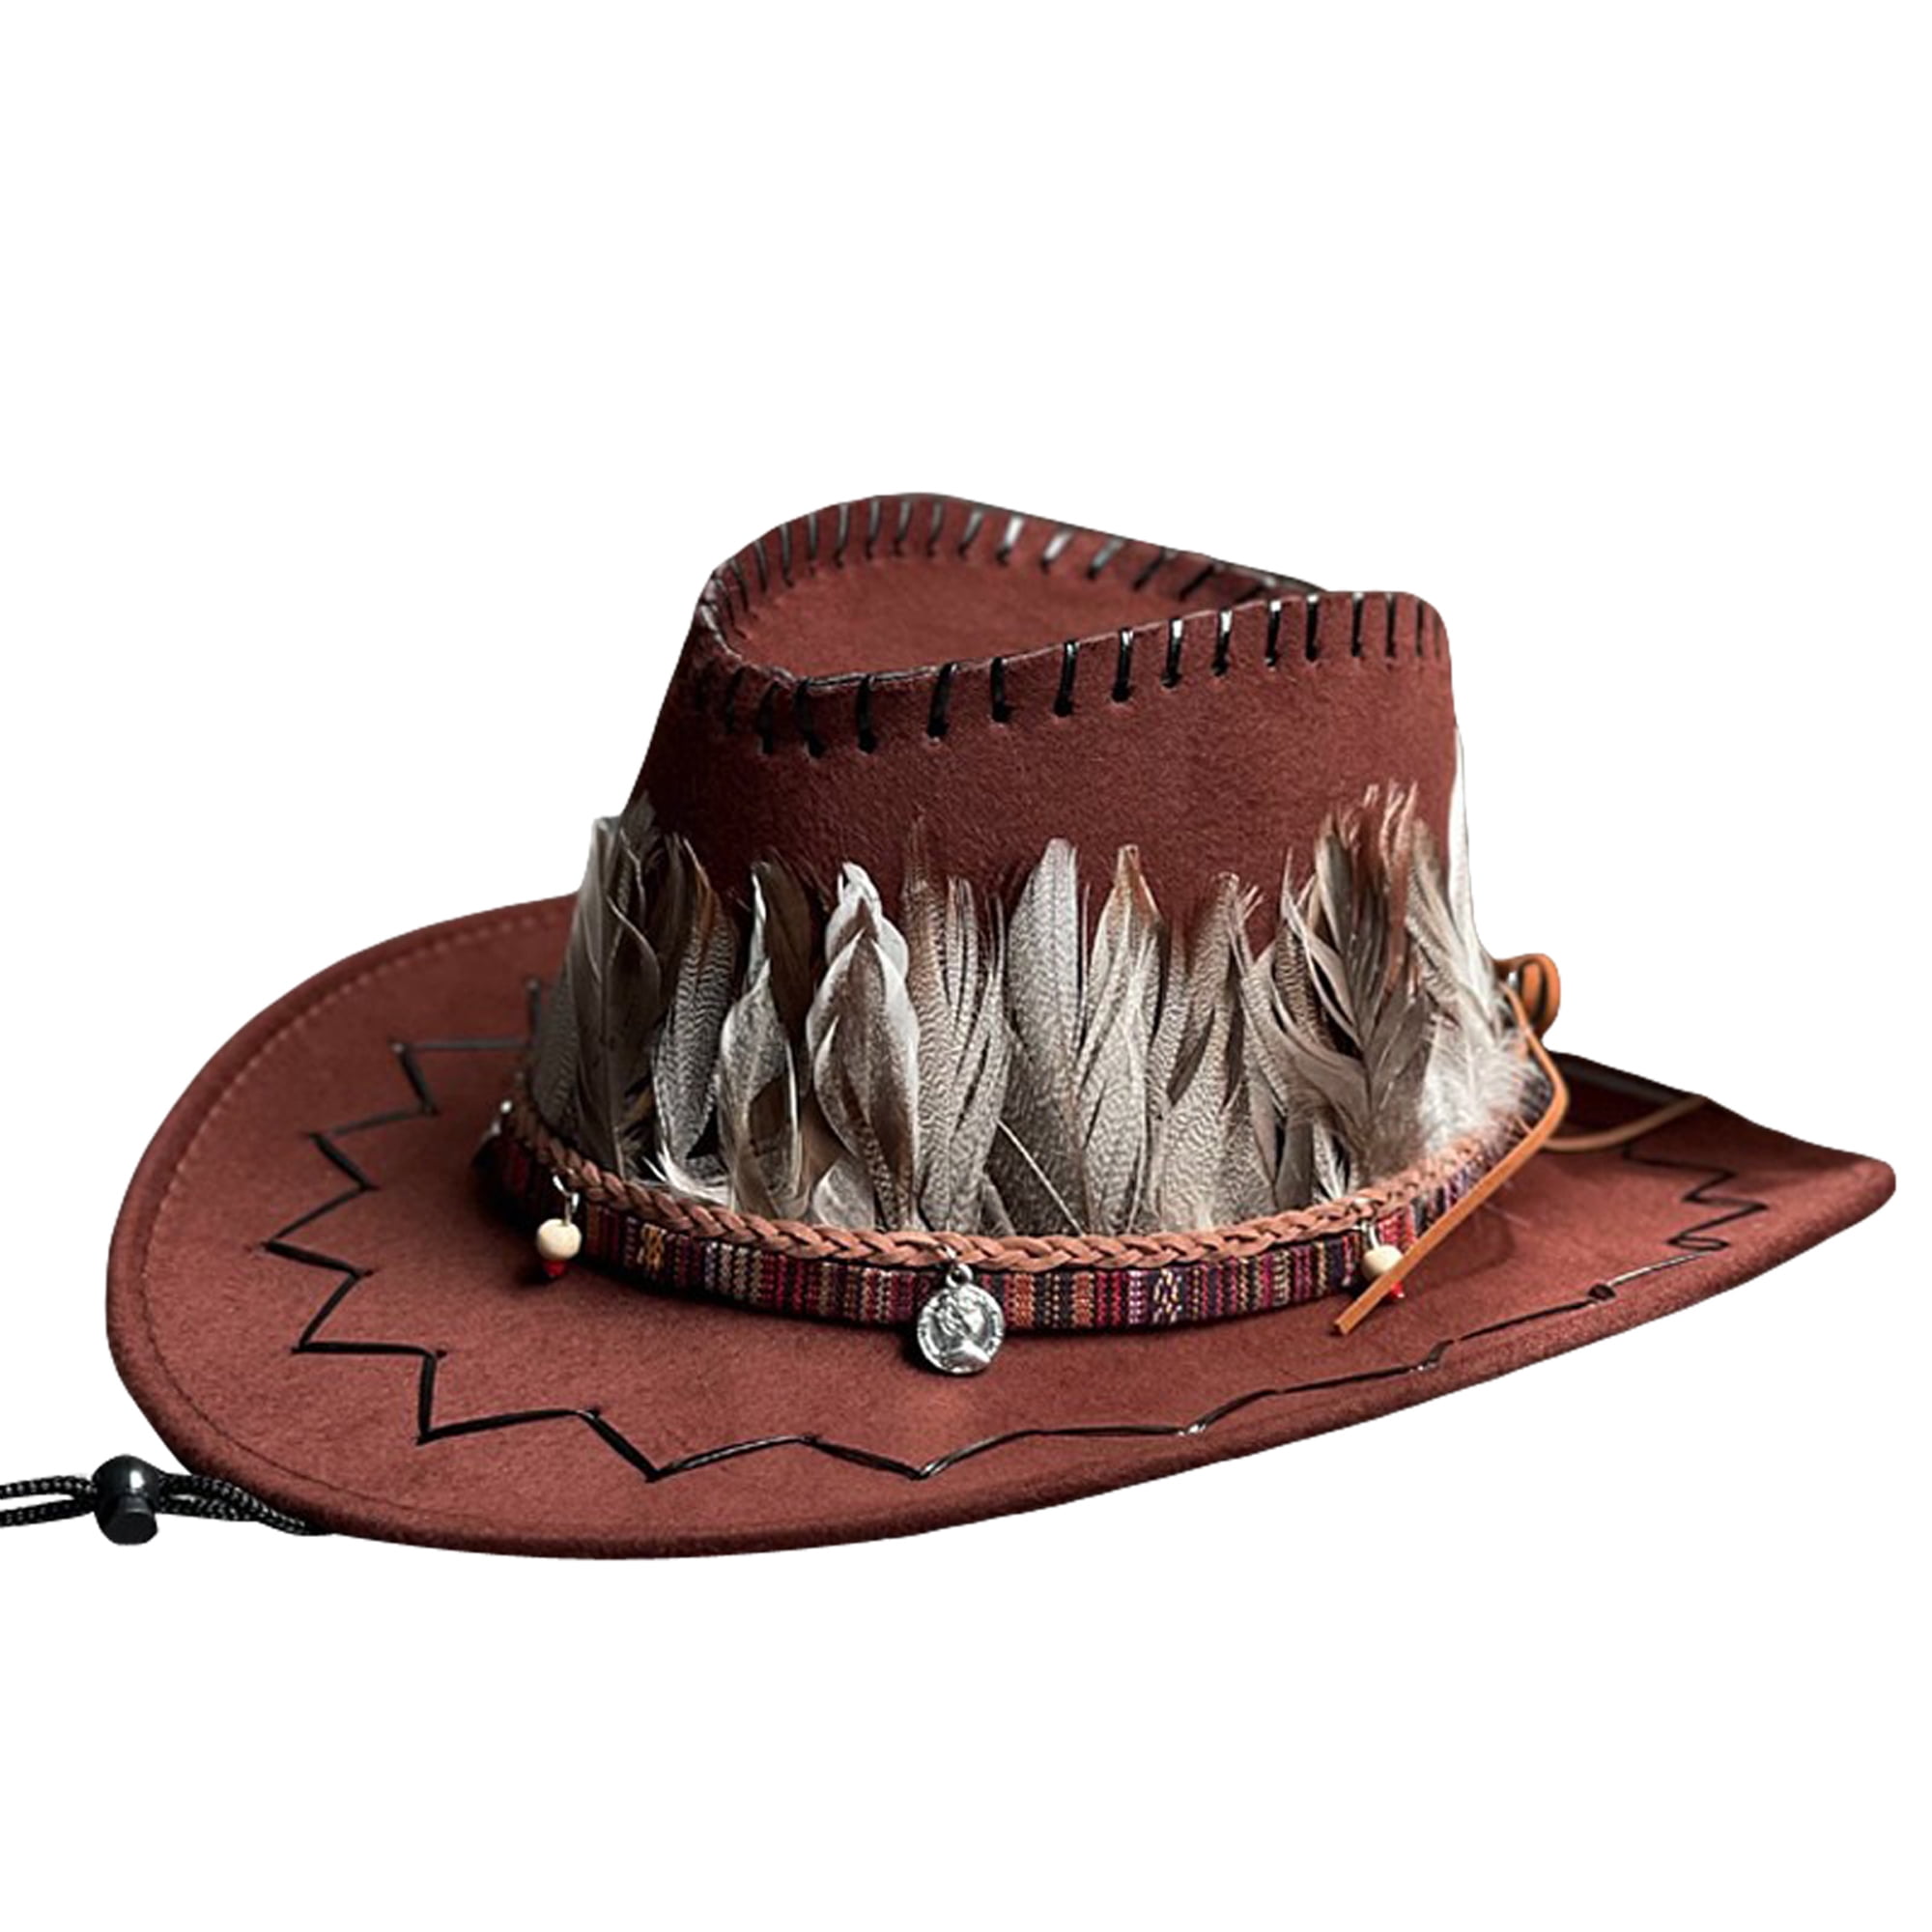 Youweixiong Women Men Western Cowboy Hat Retro Feather Fedora Hat for Hiking Rave Party Travel Costume Accessories, Adult Unisex, Size: One size